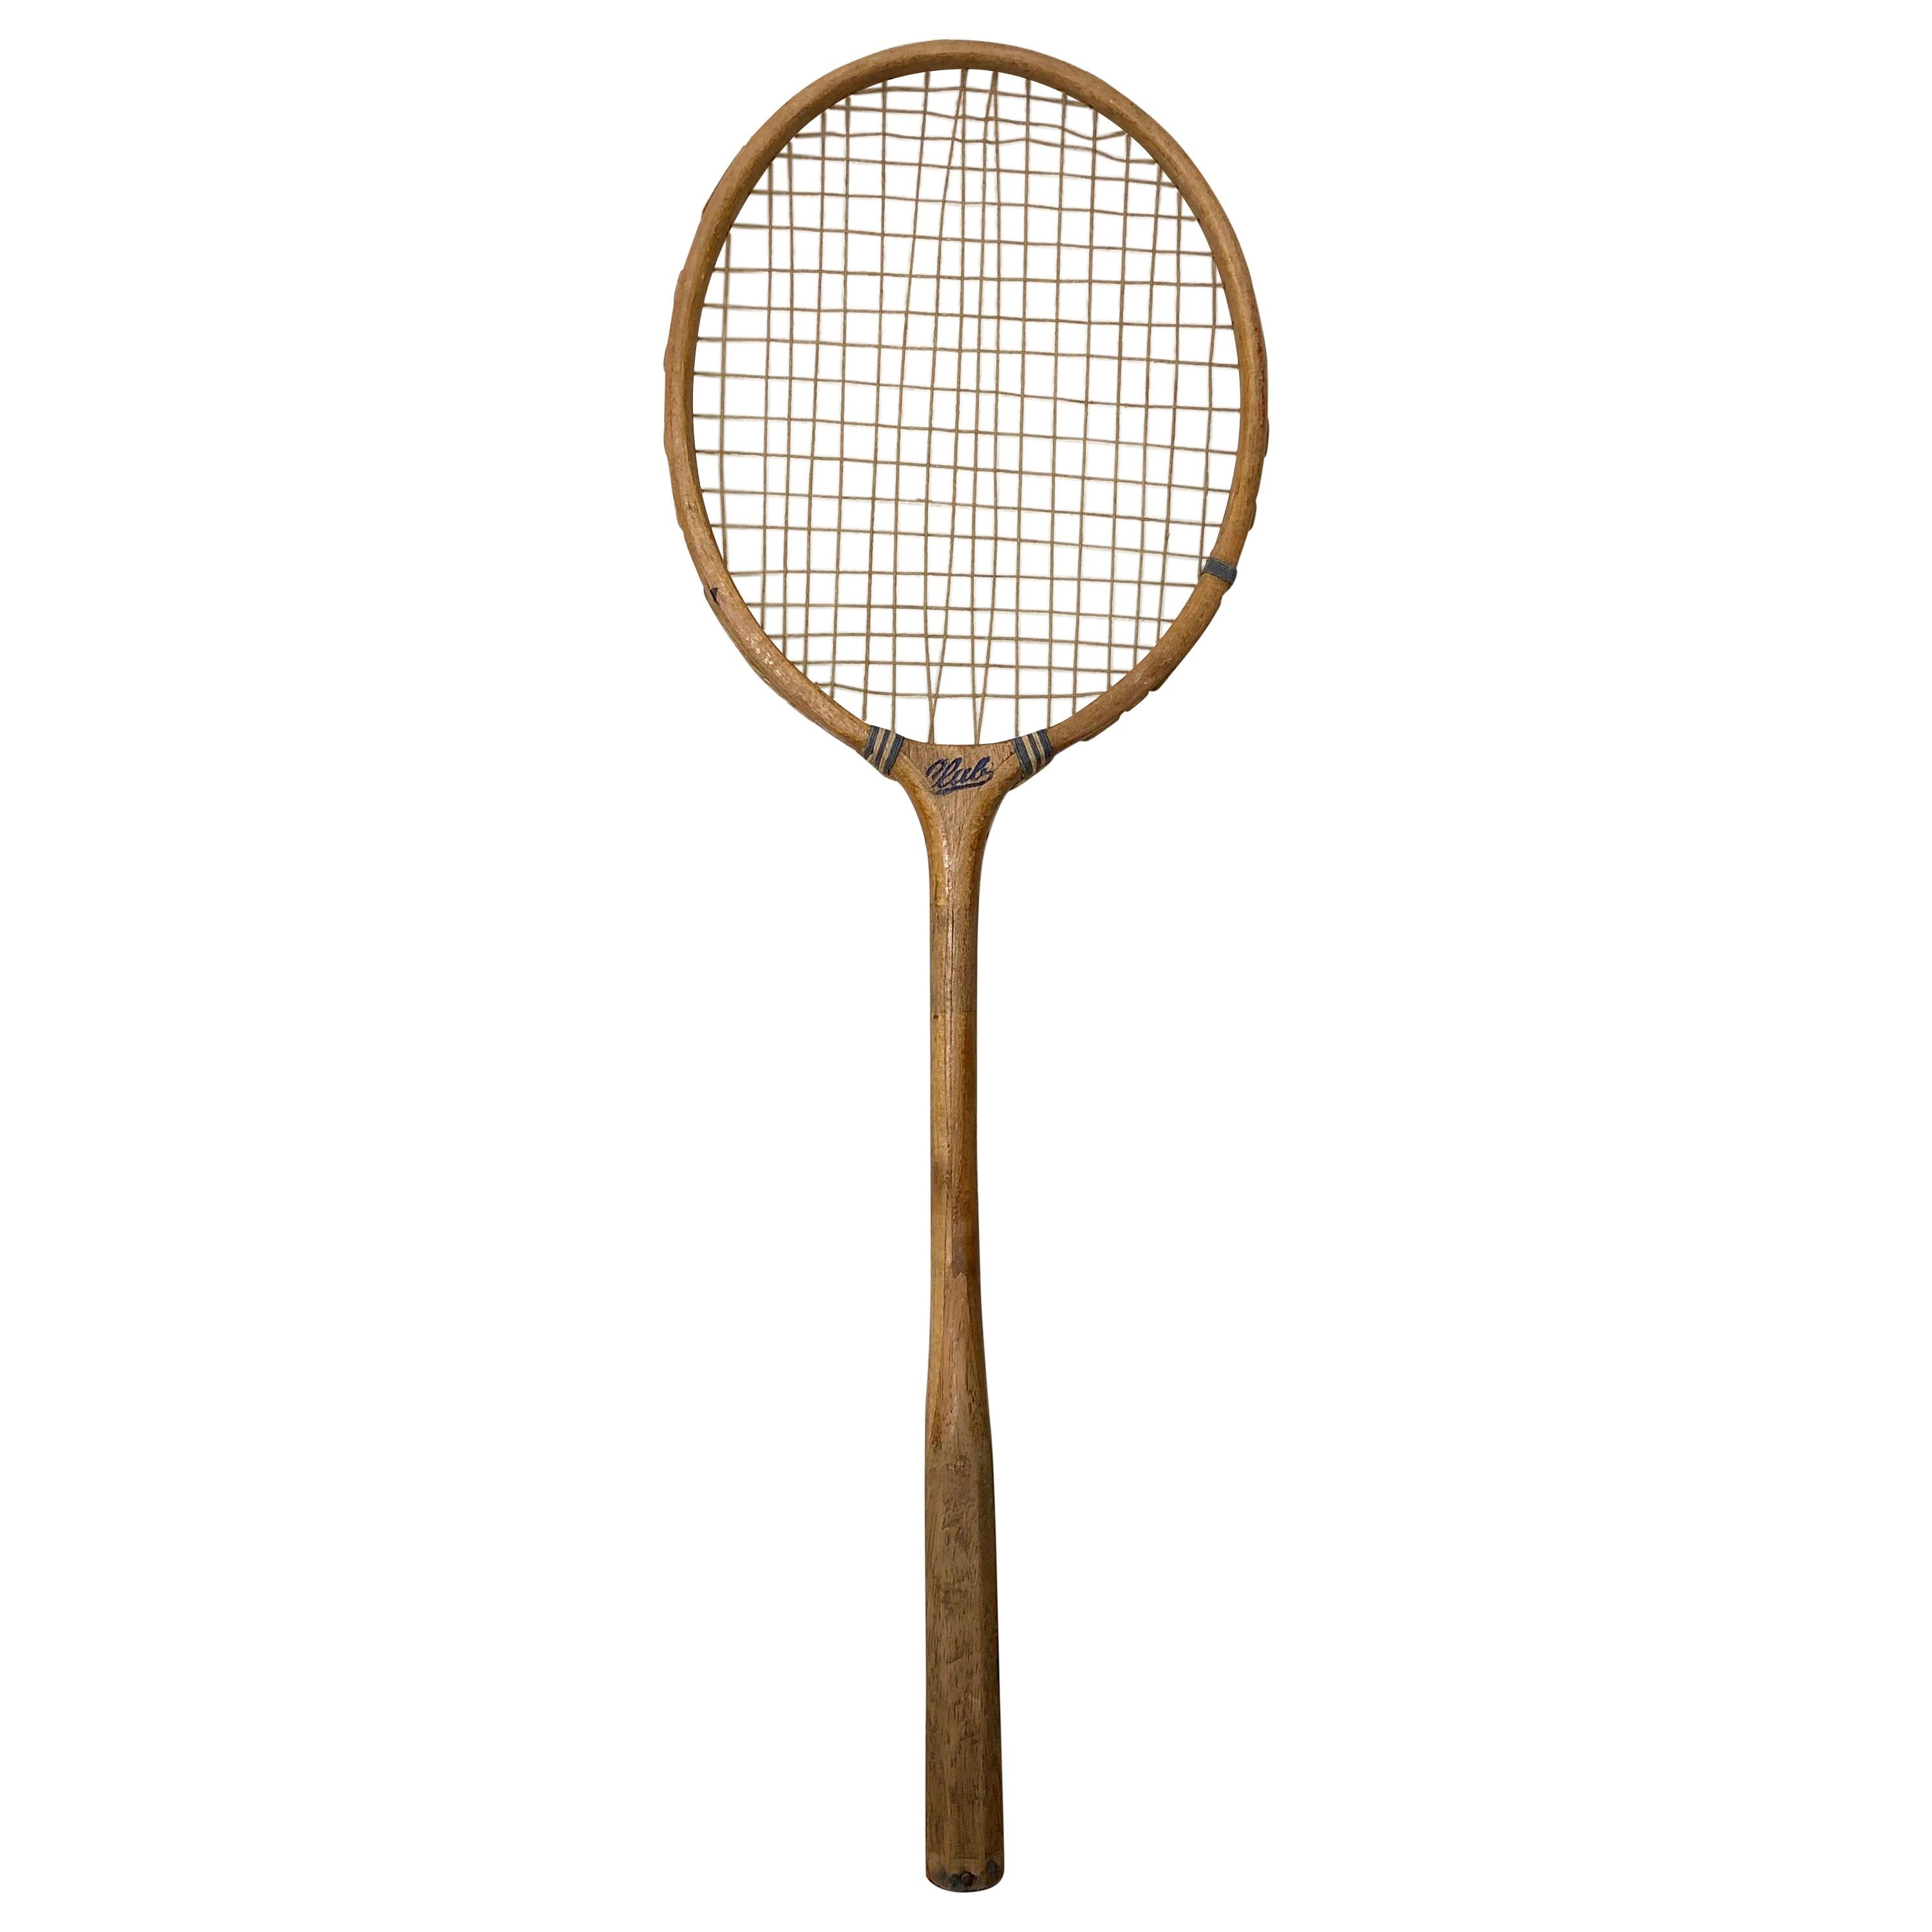 Vintage Wooden Badminton Racket Made by "Club"